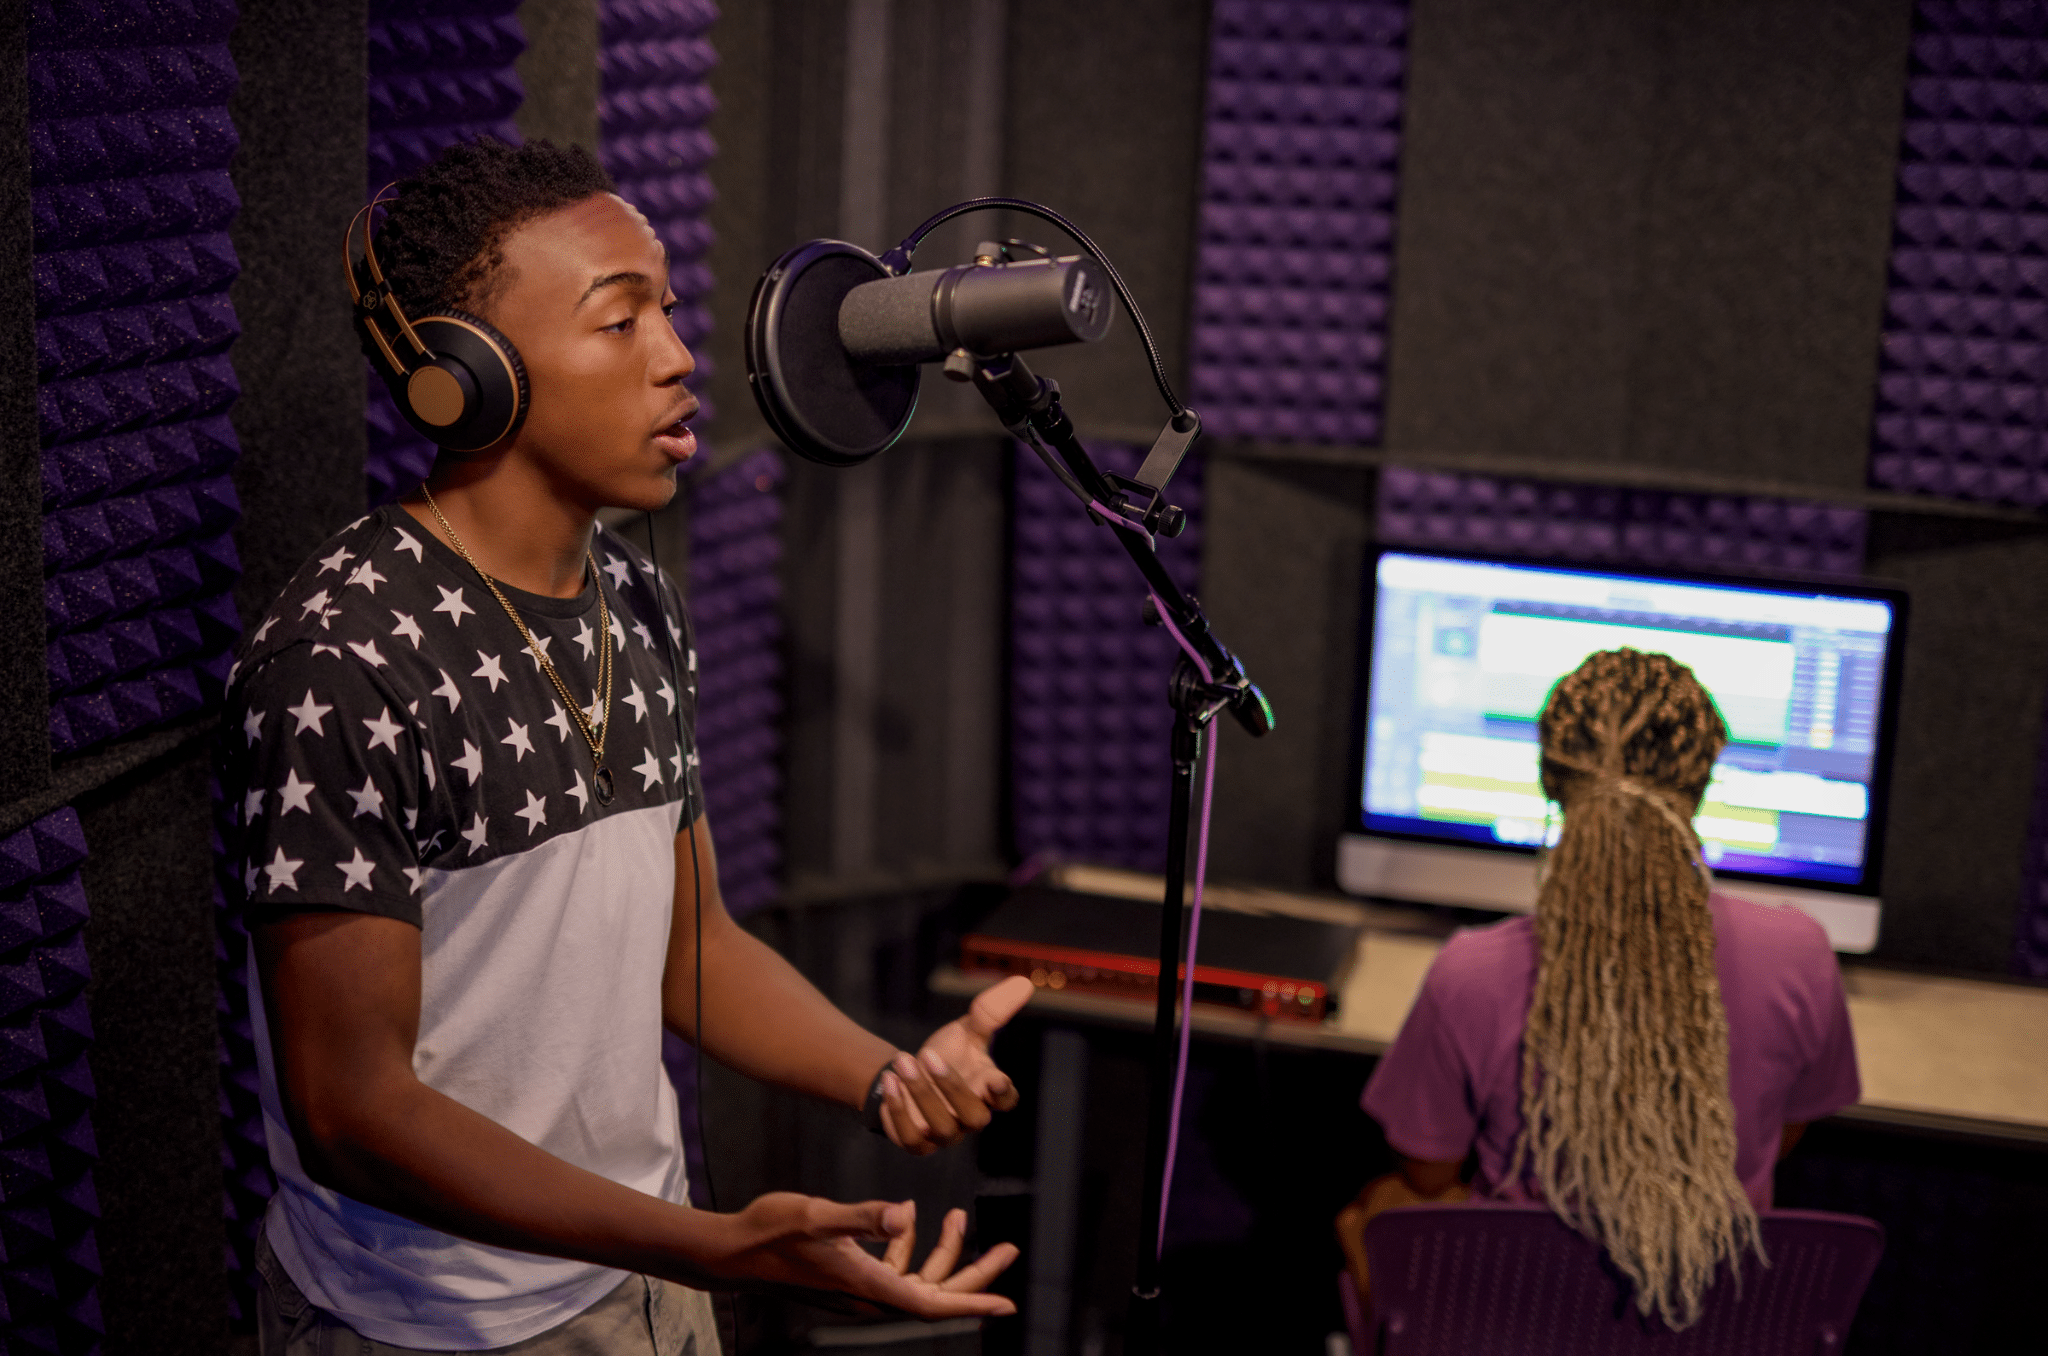 Two college students engaging in a recording session at GCU's Recording Lab. A young man is shown recording vocals into a condenser mic inside a WhisperRoom, while a female student operates the Digital Audio Workstation from a computer outside the booth